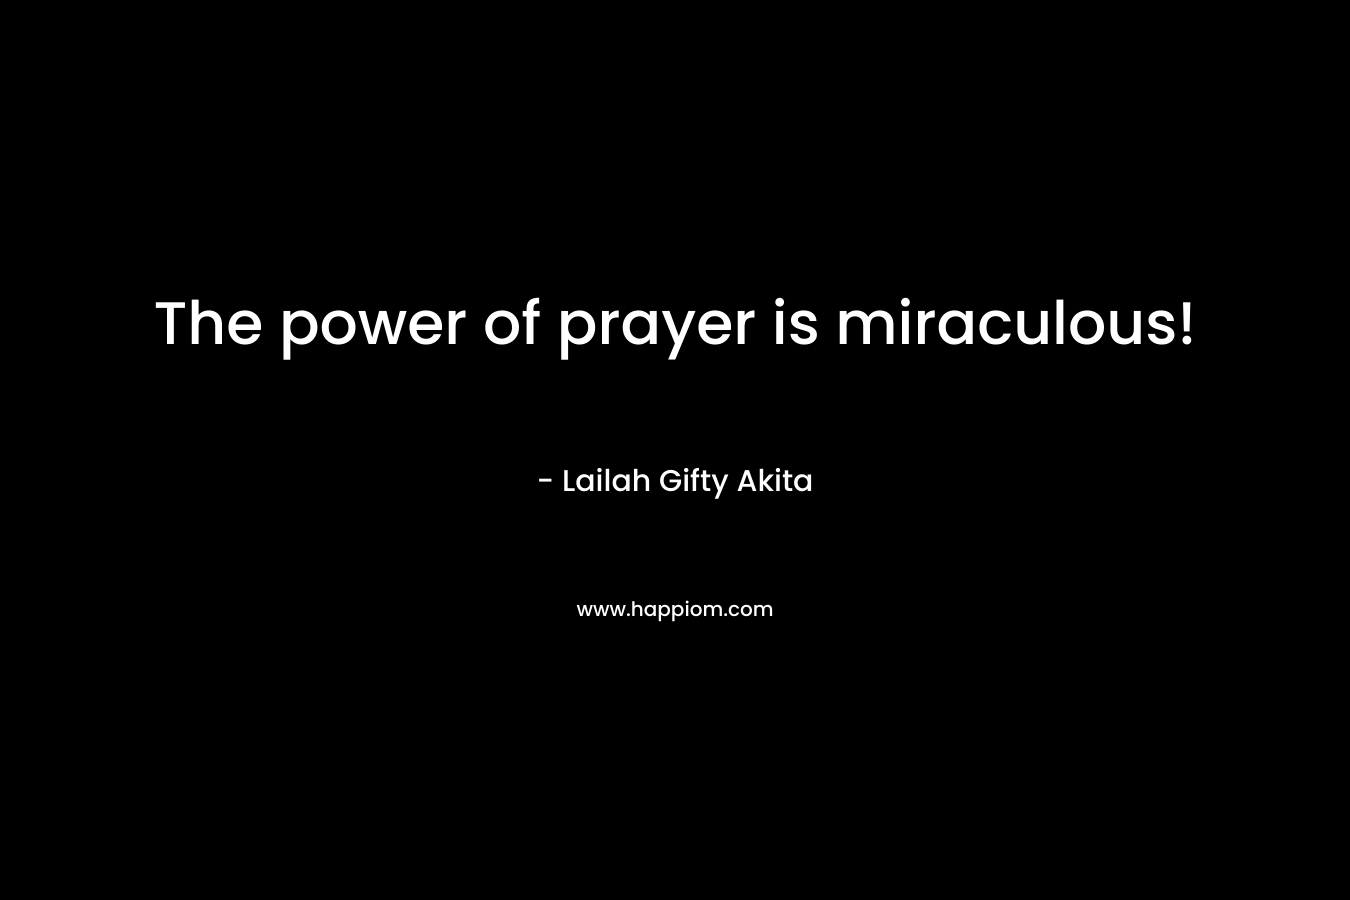 The power of prayer is miraculous!